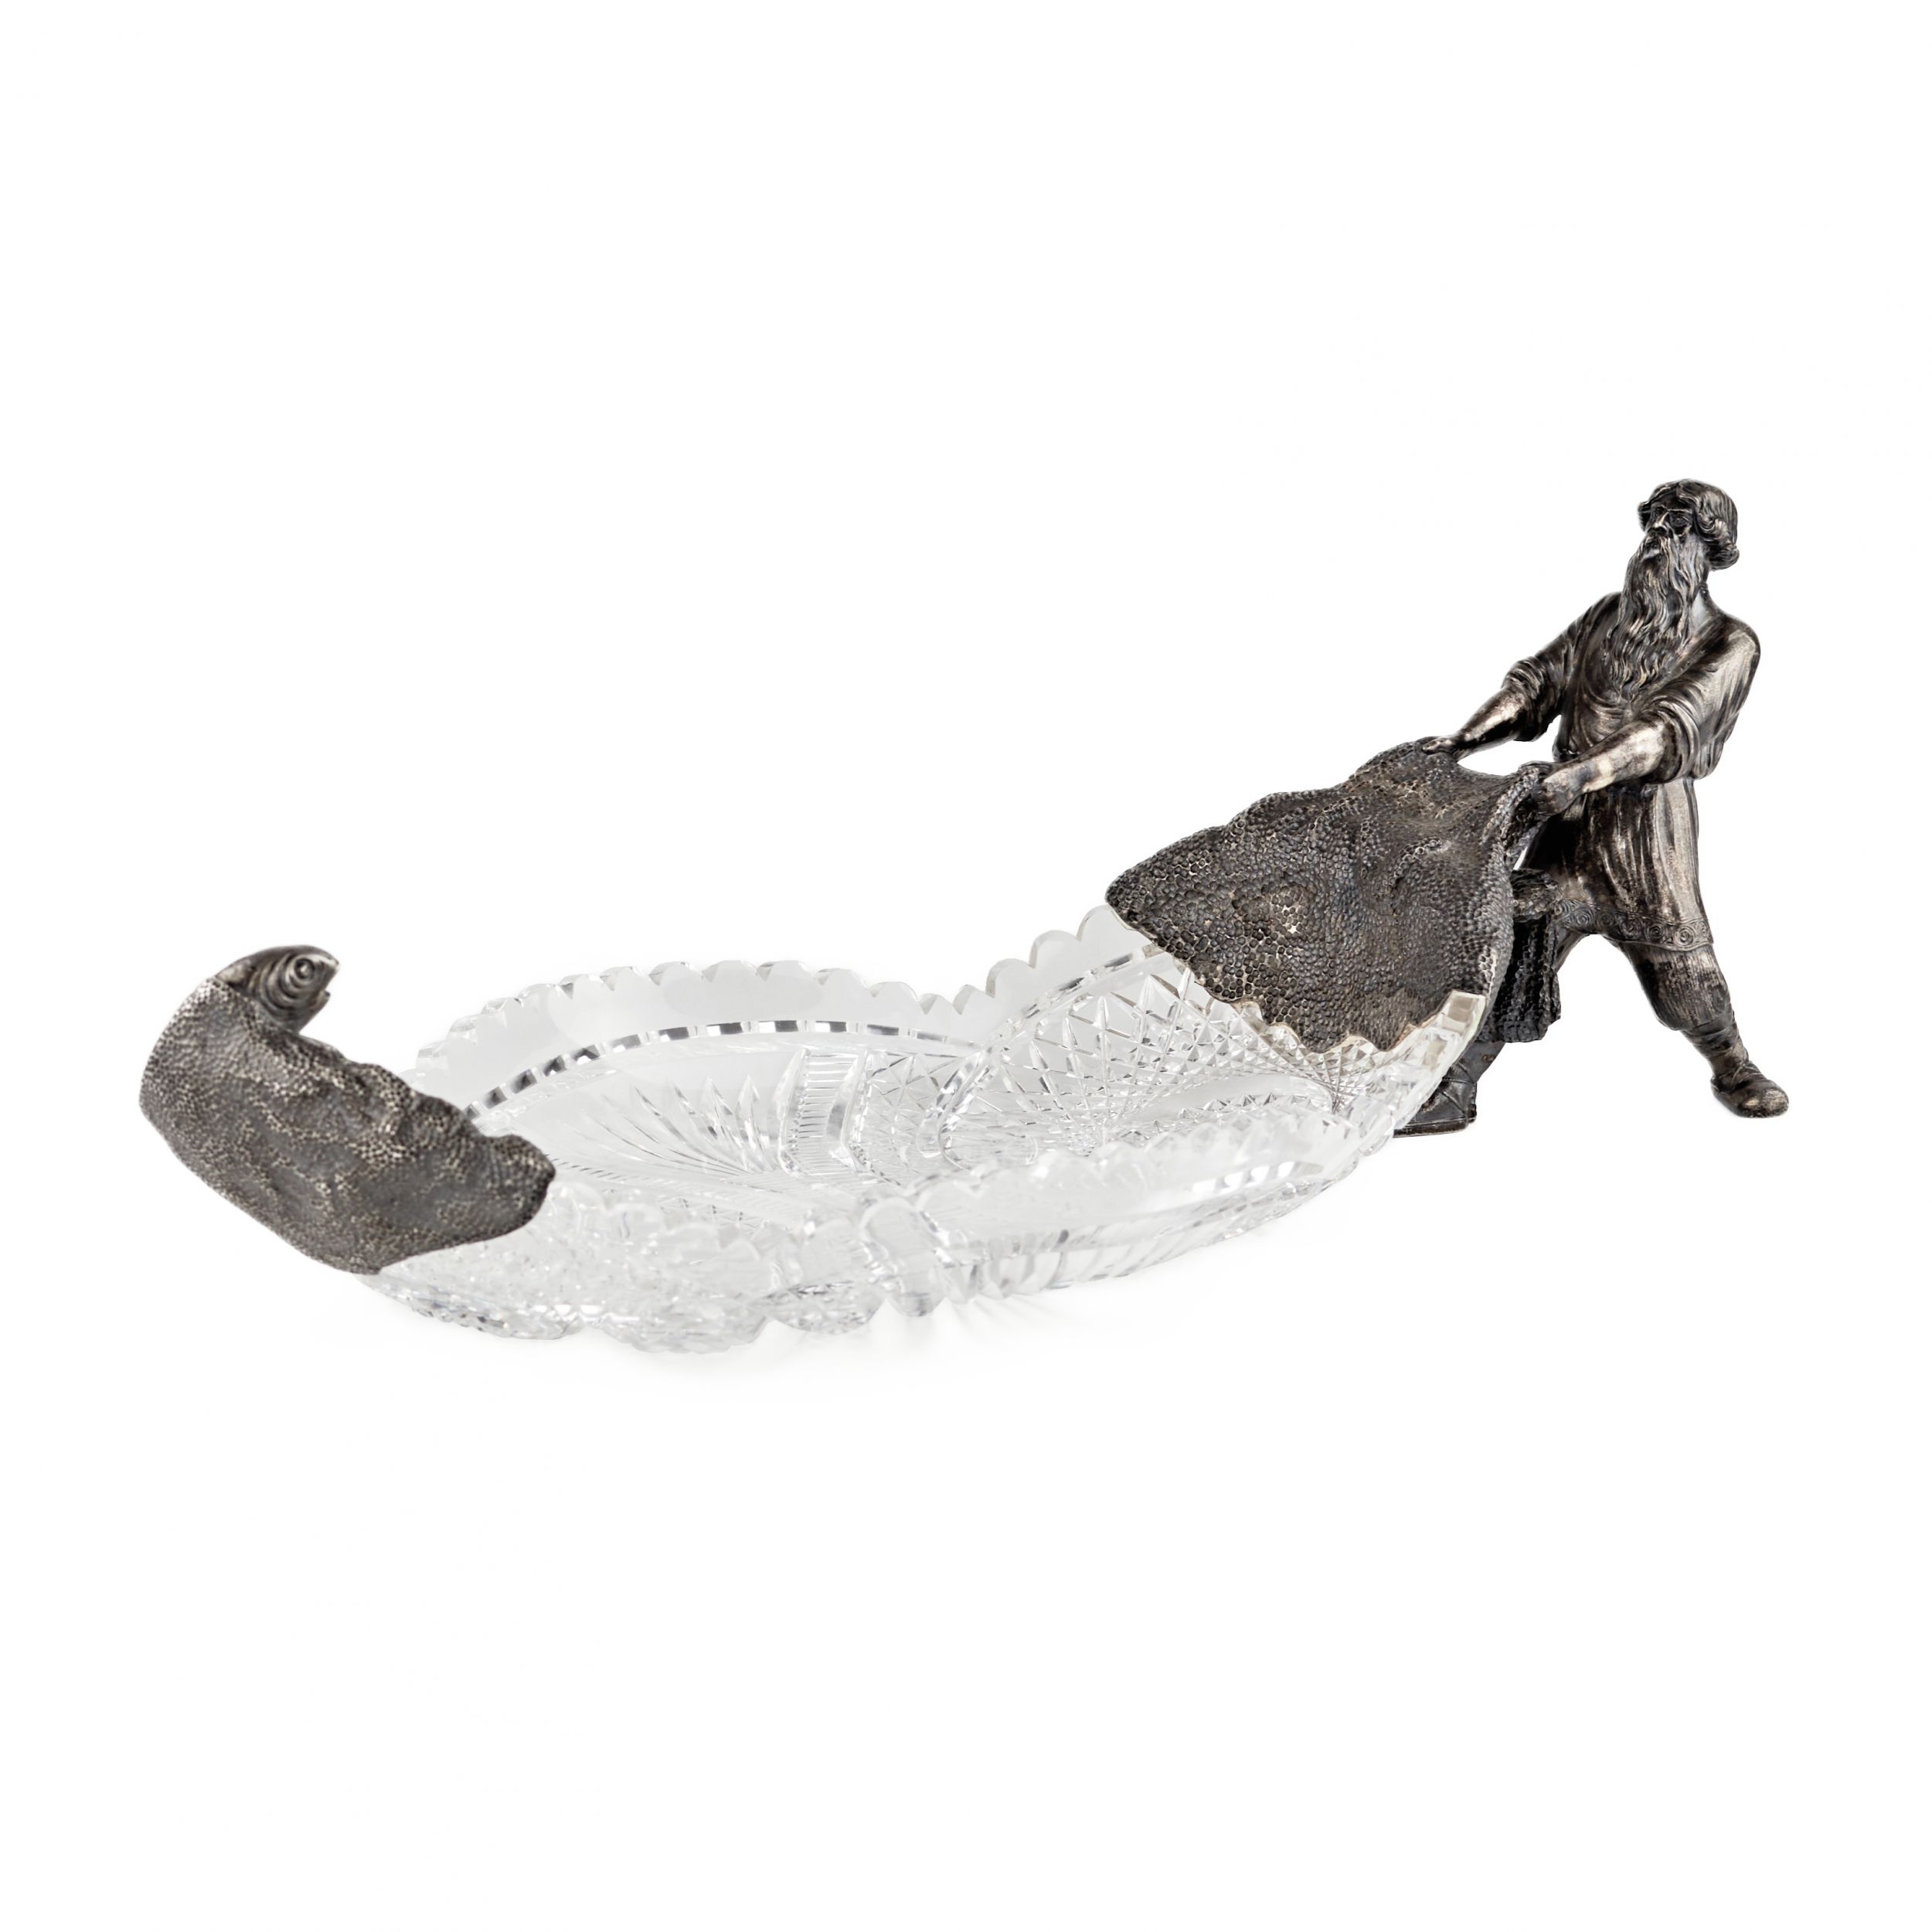 Crystal-dish-in-silver-14-artels-of-jewelers-The-Tale-of-the-Fisherman-and-the-Fish-Moscow-1908-1917